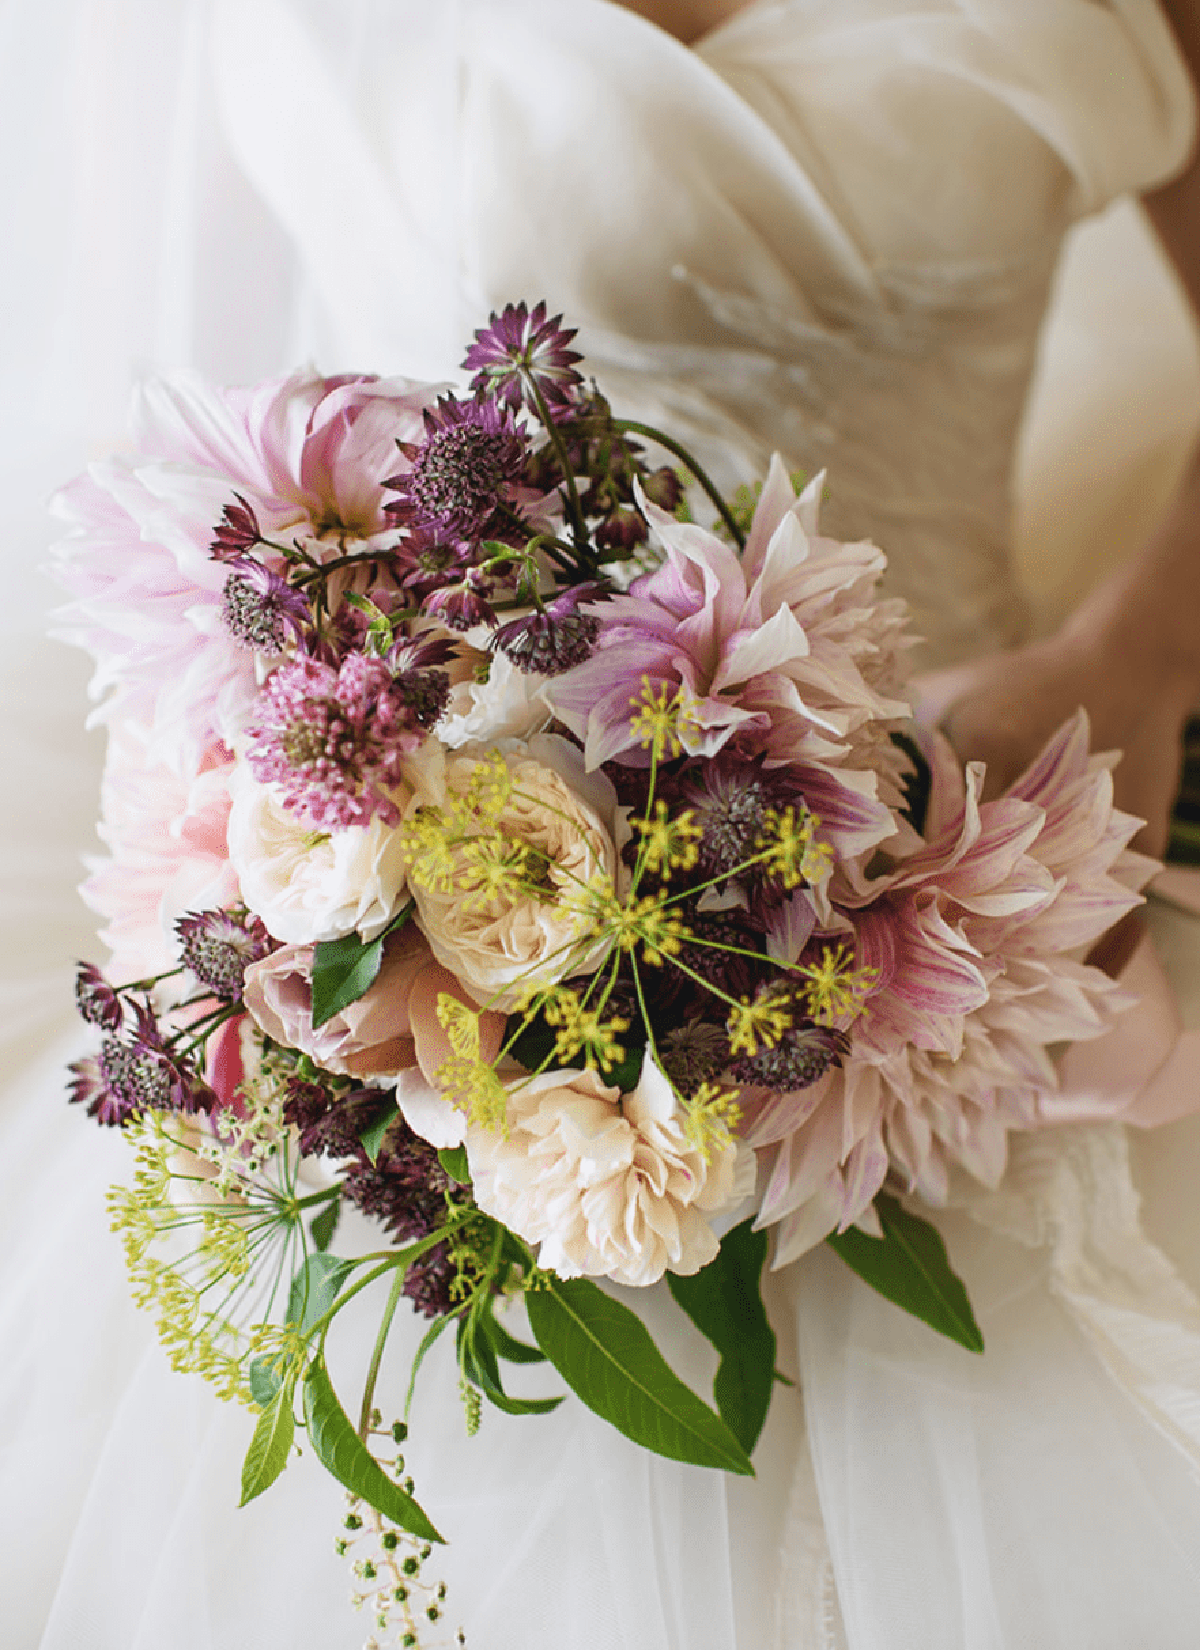 Bride holding pink and purple flower bouquet